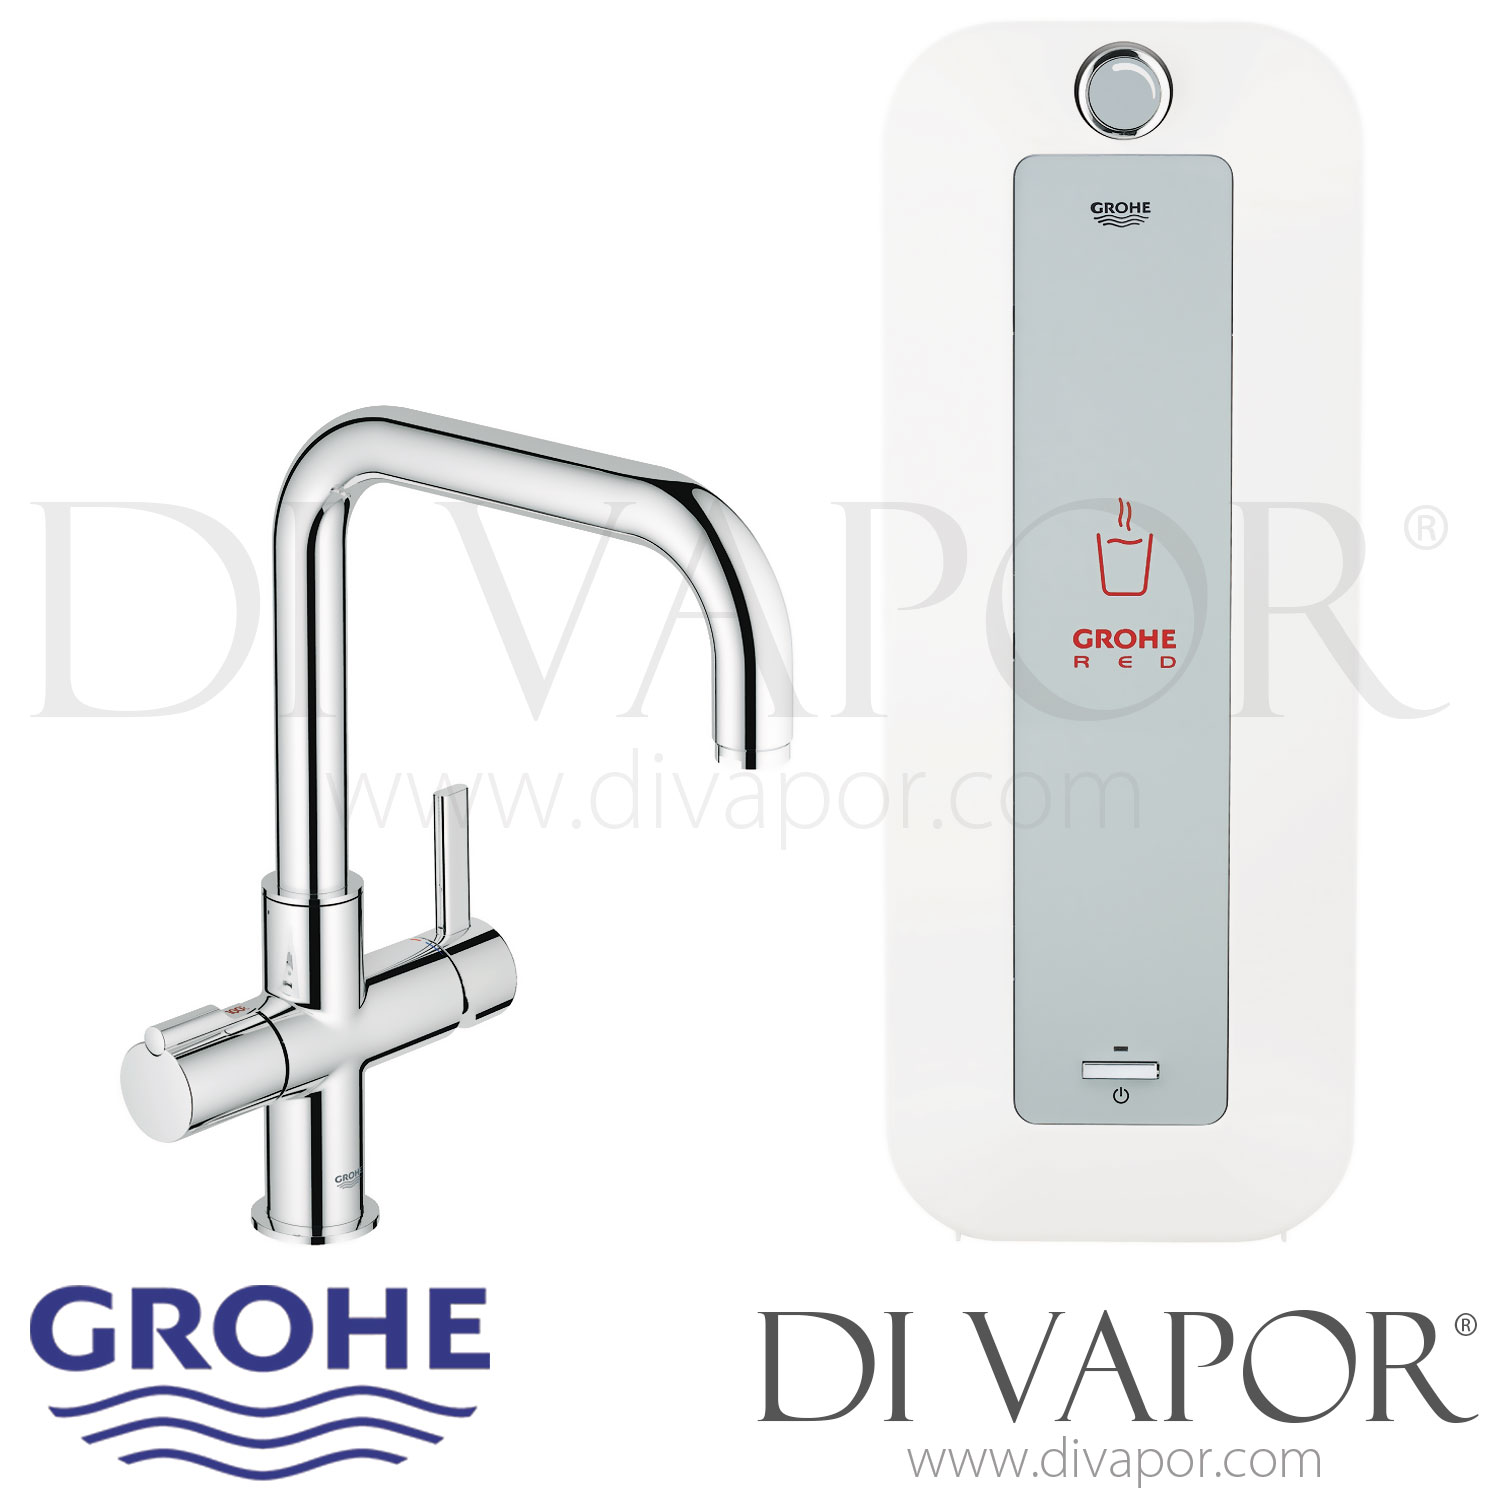 Låse skibsbygning vogn Grohe 30156000 Red Duo Tap and Combi-Boiler (8 Liter) Spare Parts